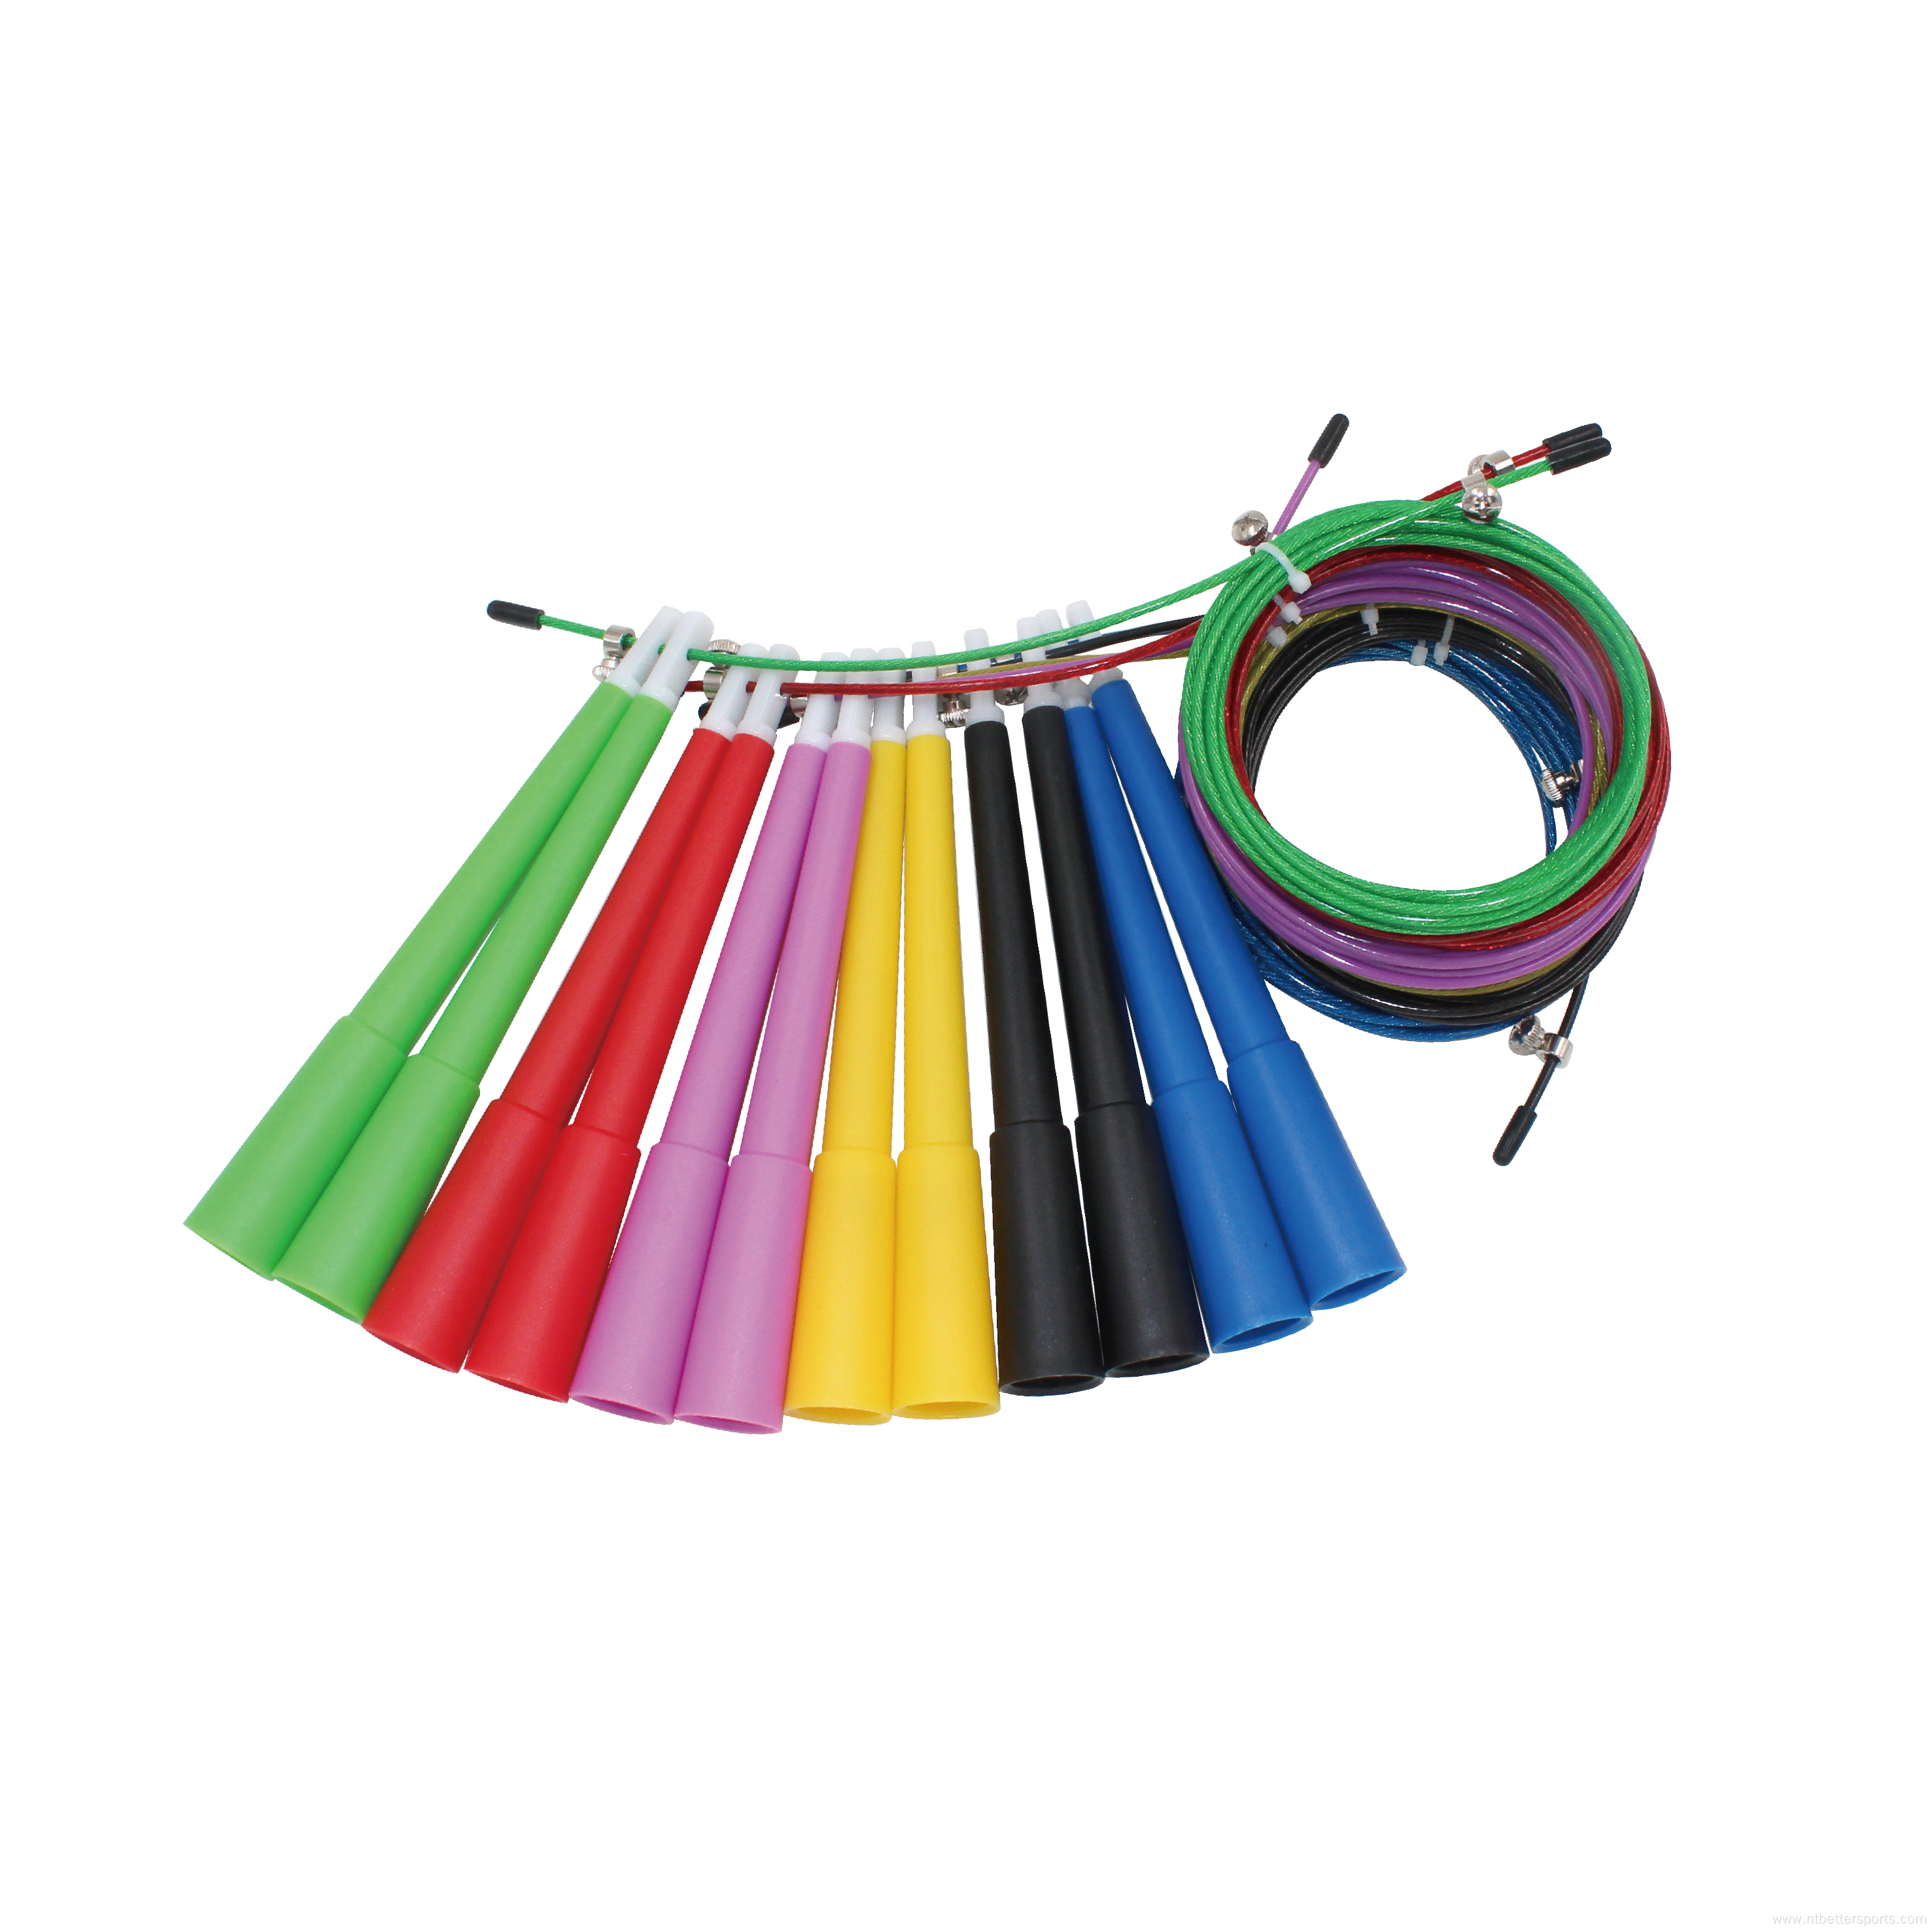 Quality assurance jump rope for weigjt loss